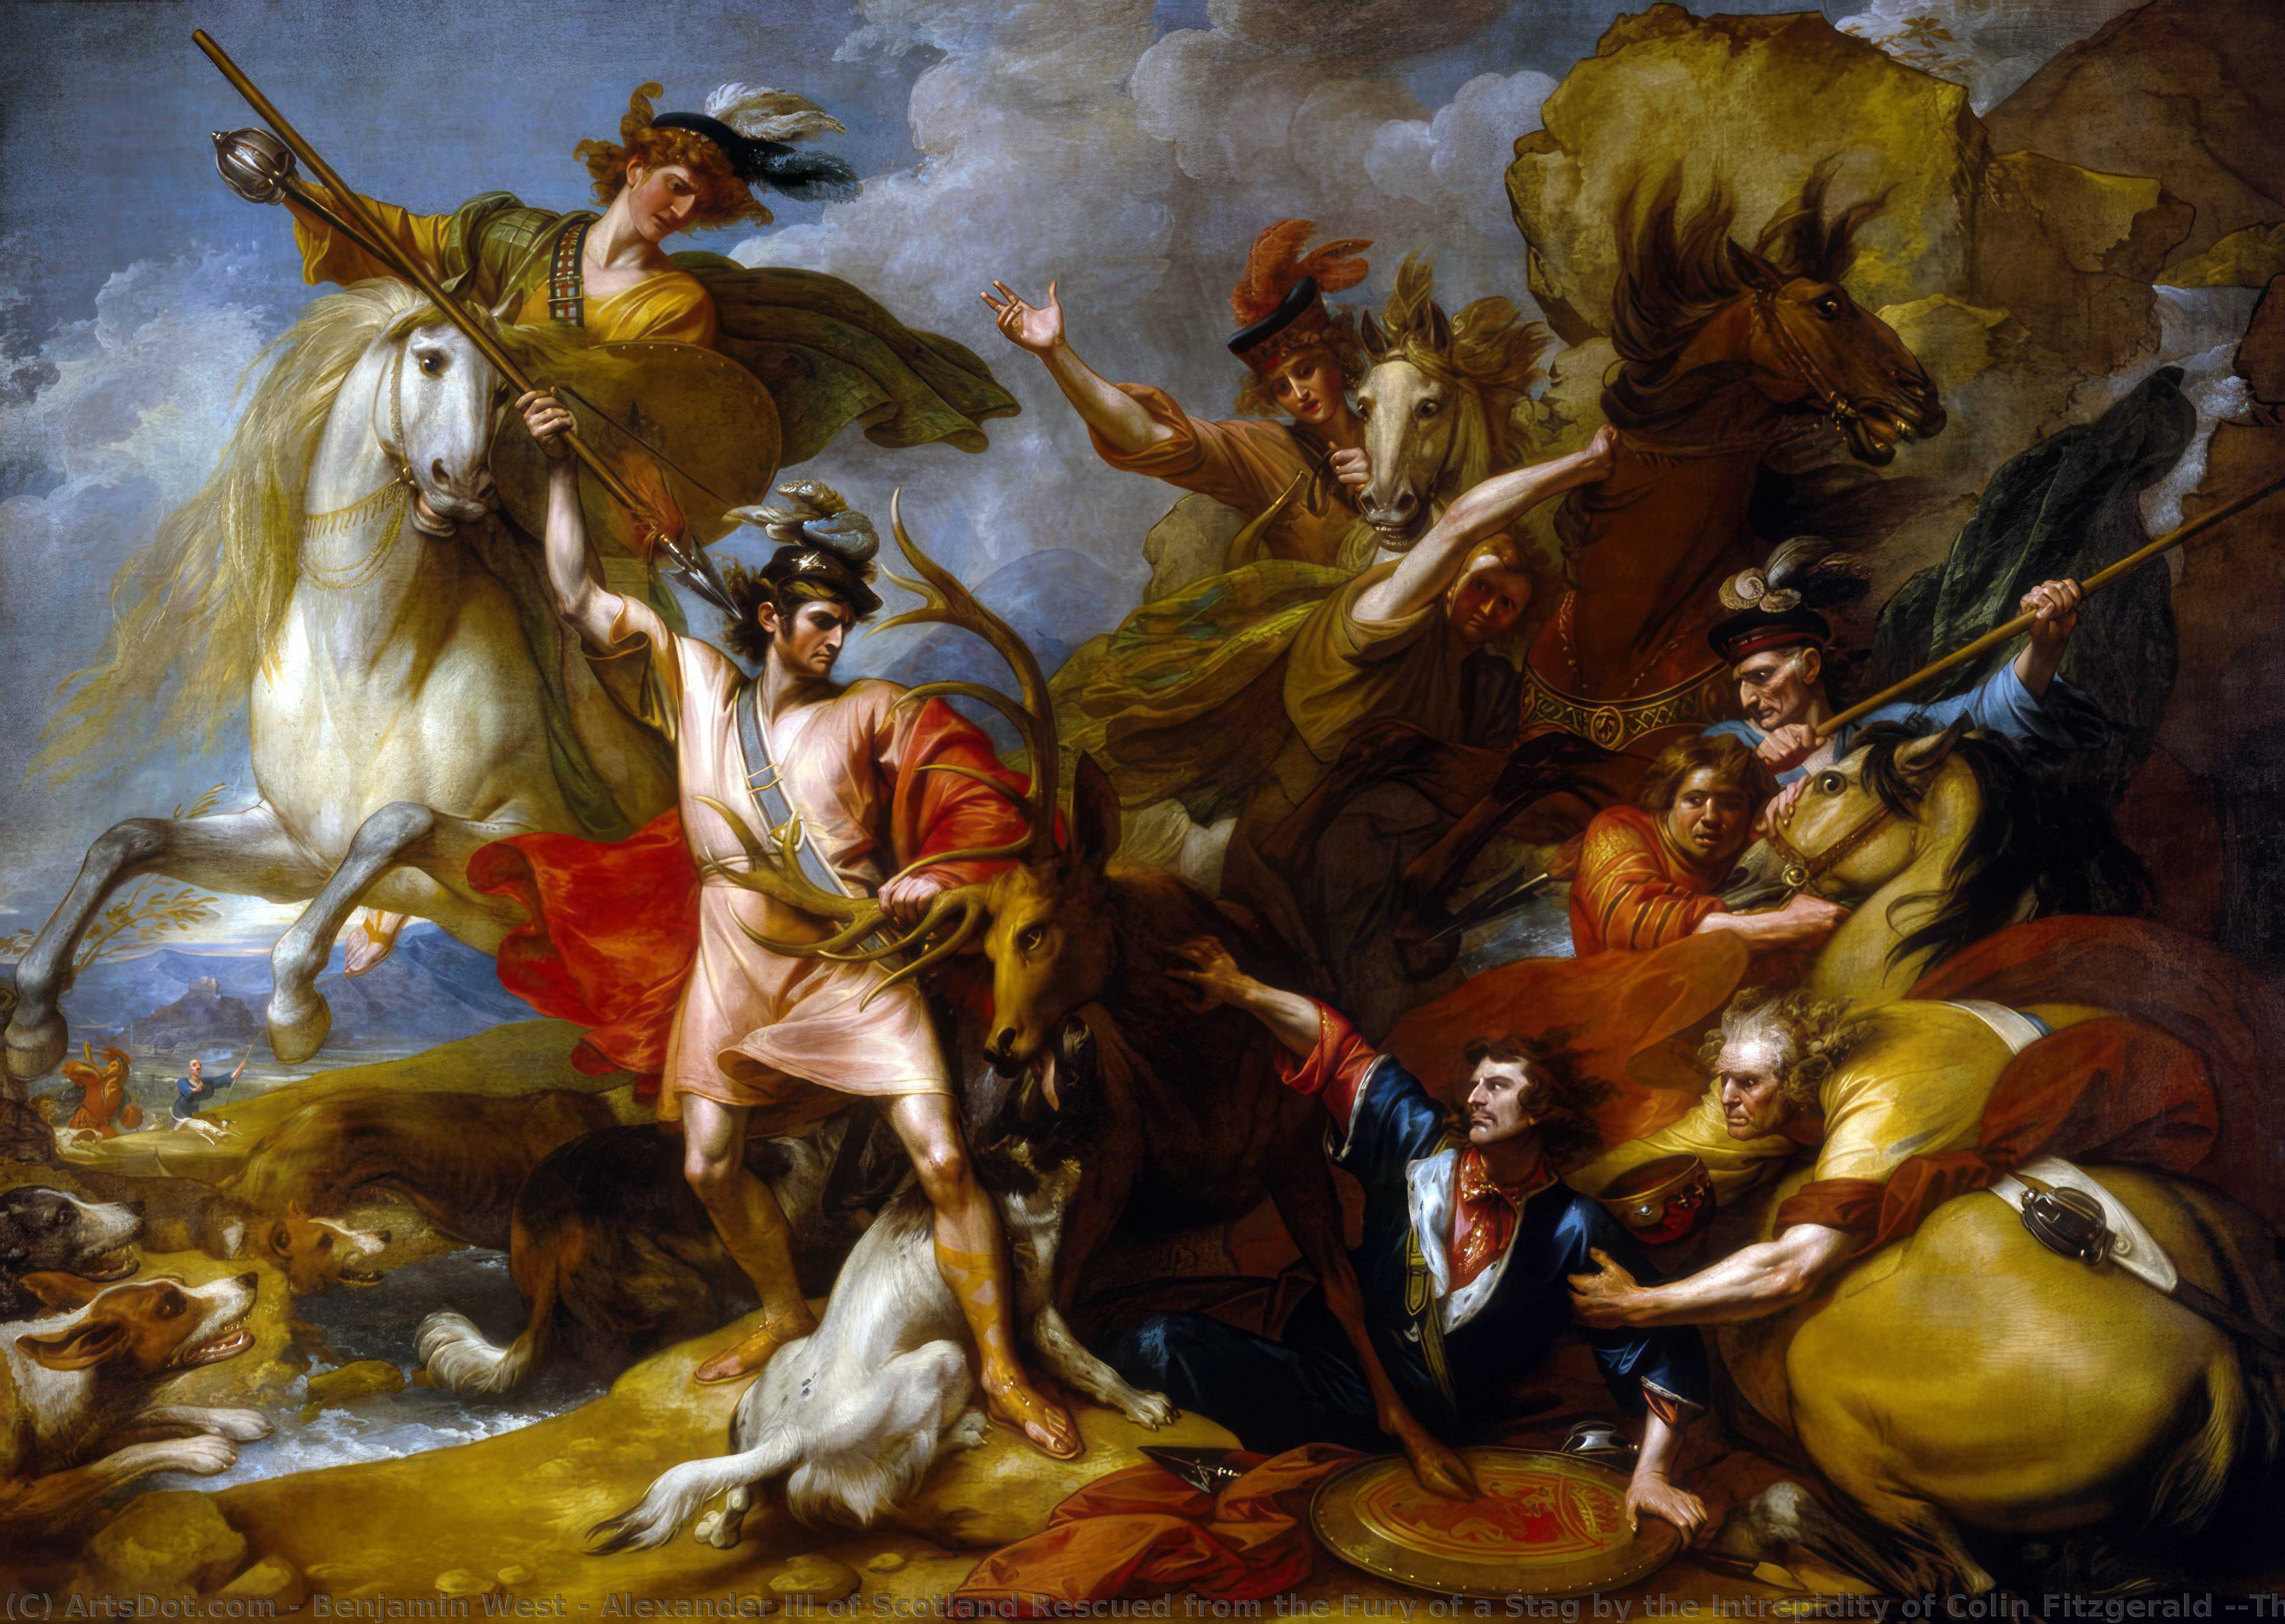 WikiOO.org - Encyclopedia of Fine Arts - Schilderen, Artwork Benjamin West - Alexander III of Scotland Rescued from the Fury of a Stag by the Intrepidity of Colin Fitzgerald ('The Death of the Stag')